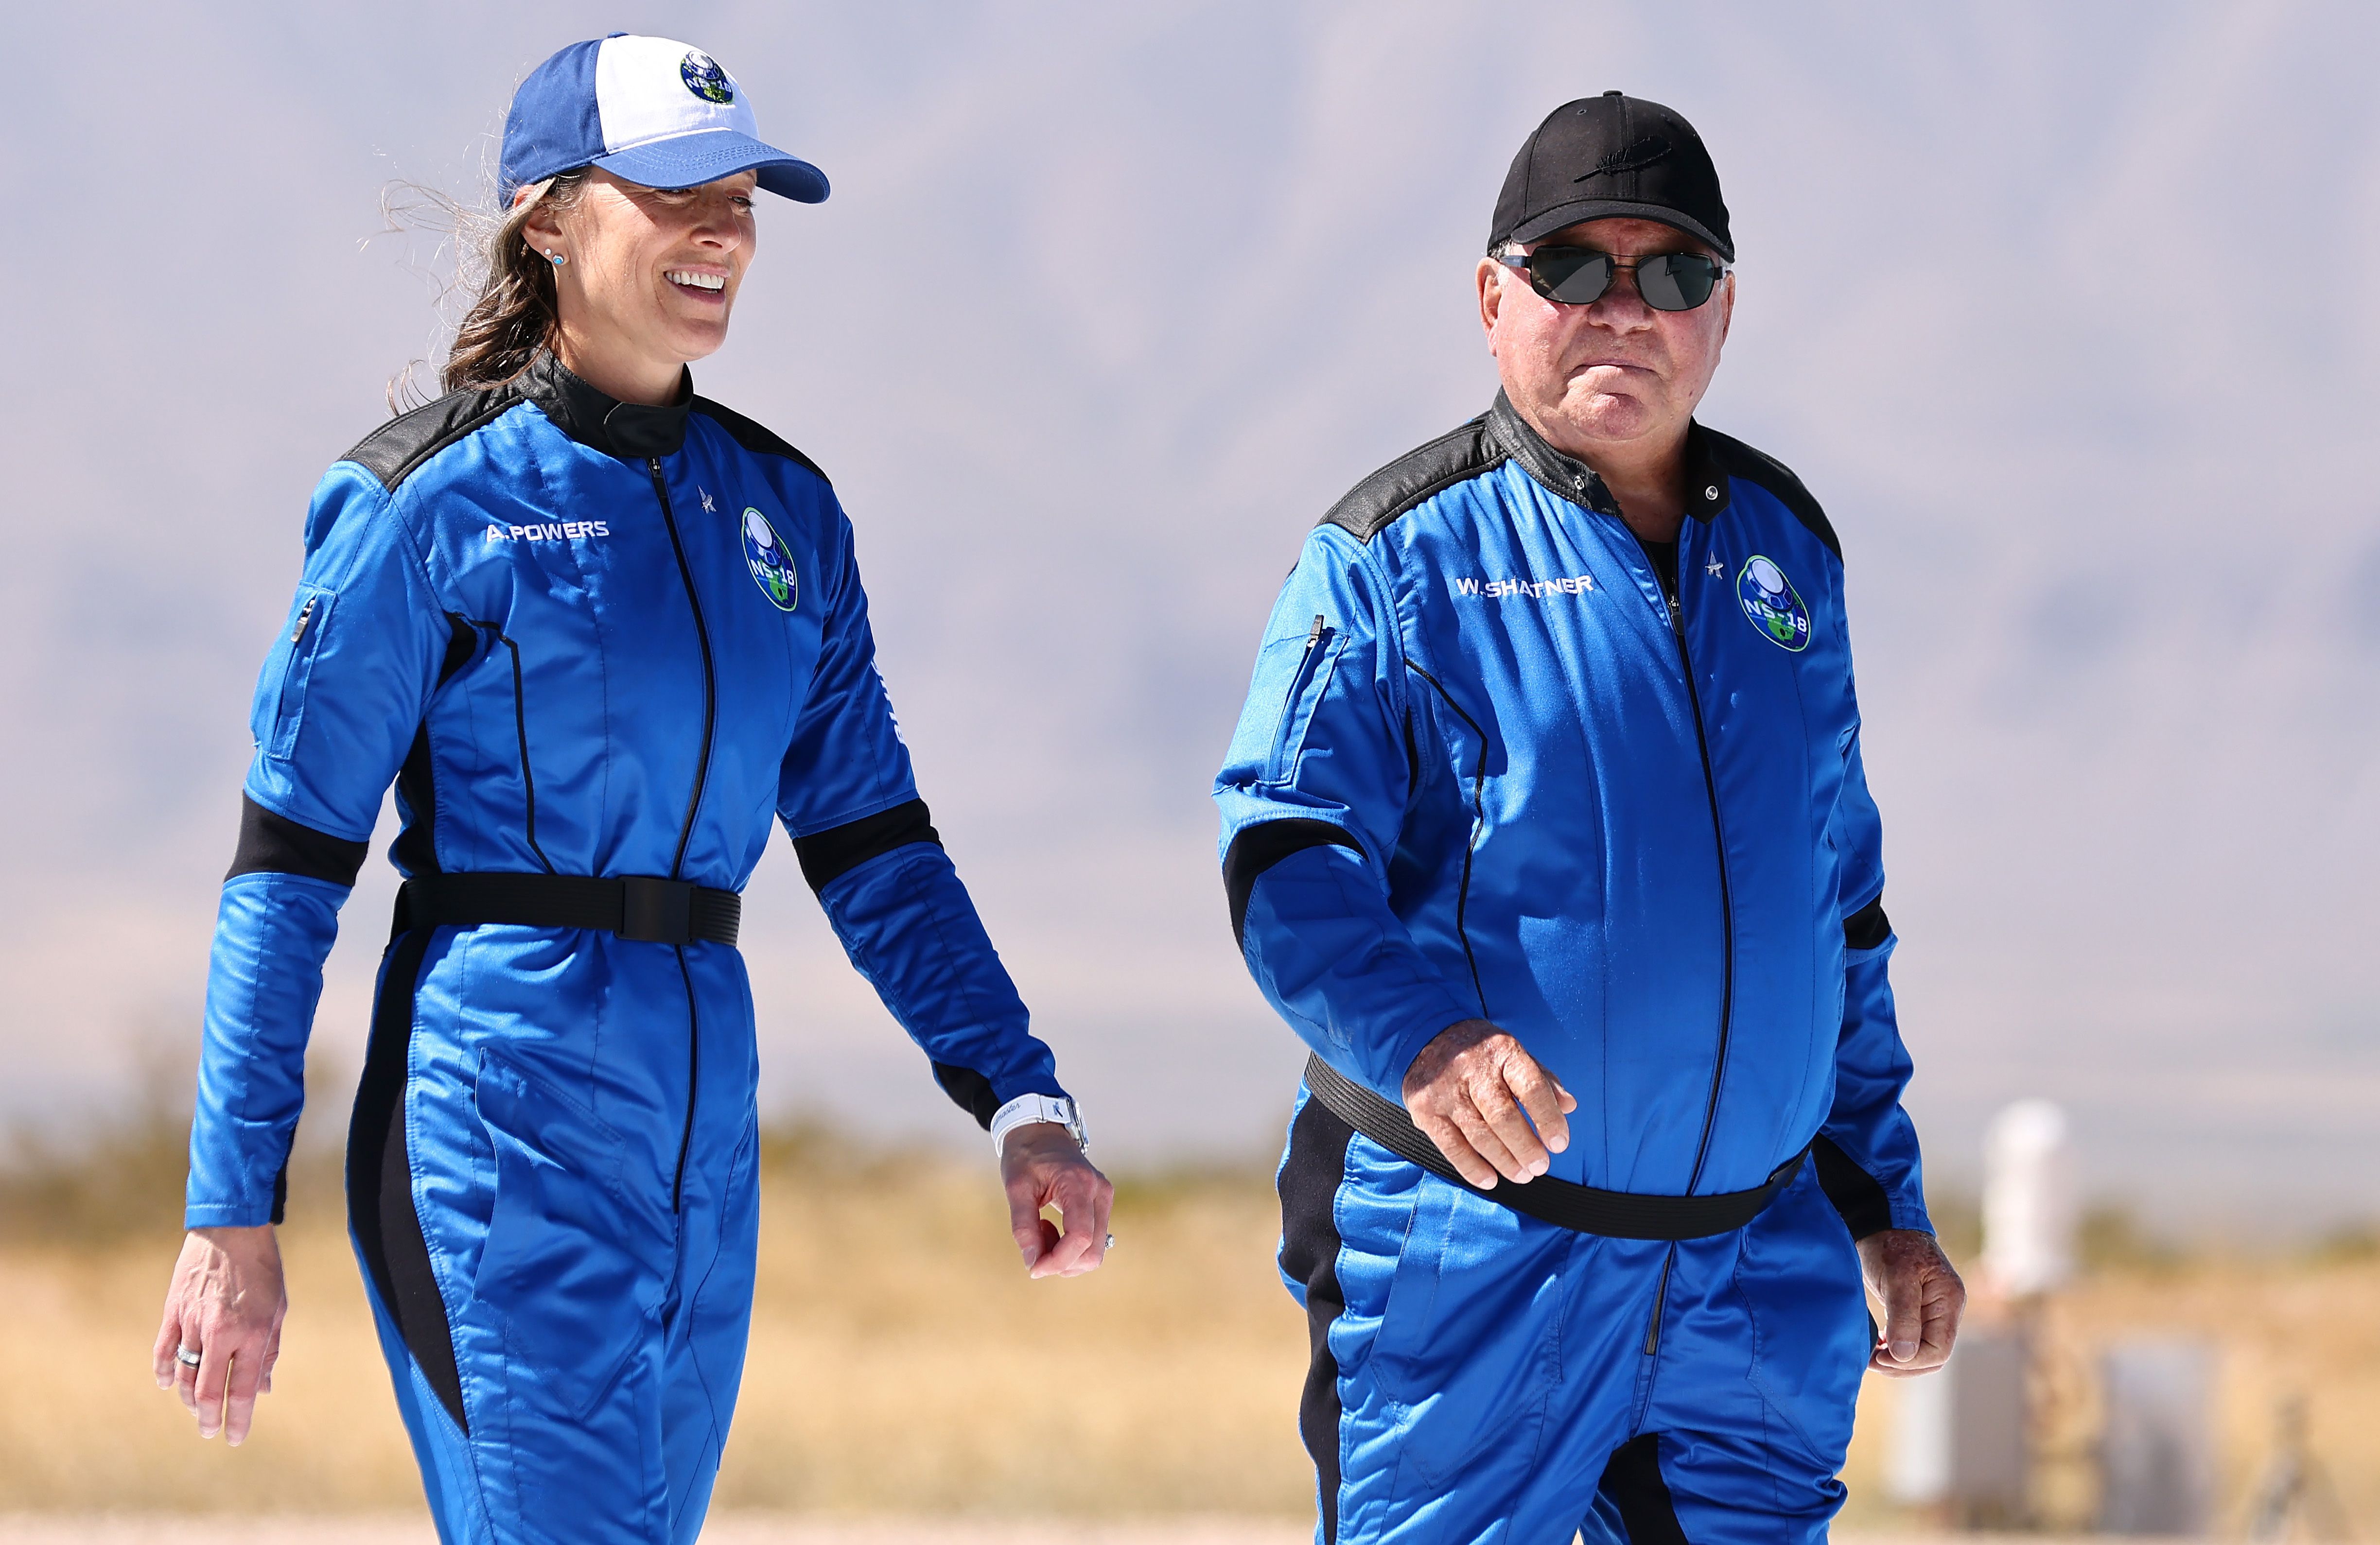 Shatner and Blue Origins Vice President of Mission & Flight Operations, Audrey Powers walking together